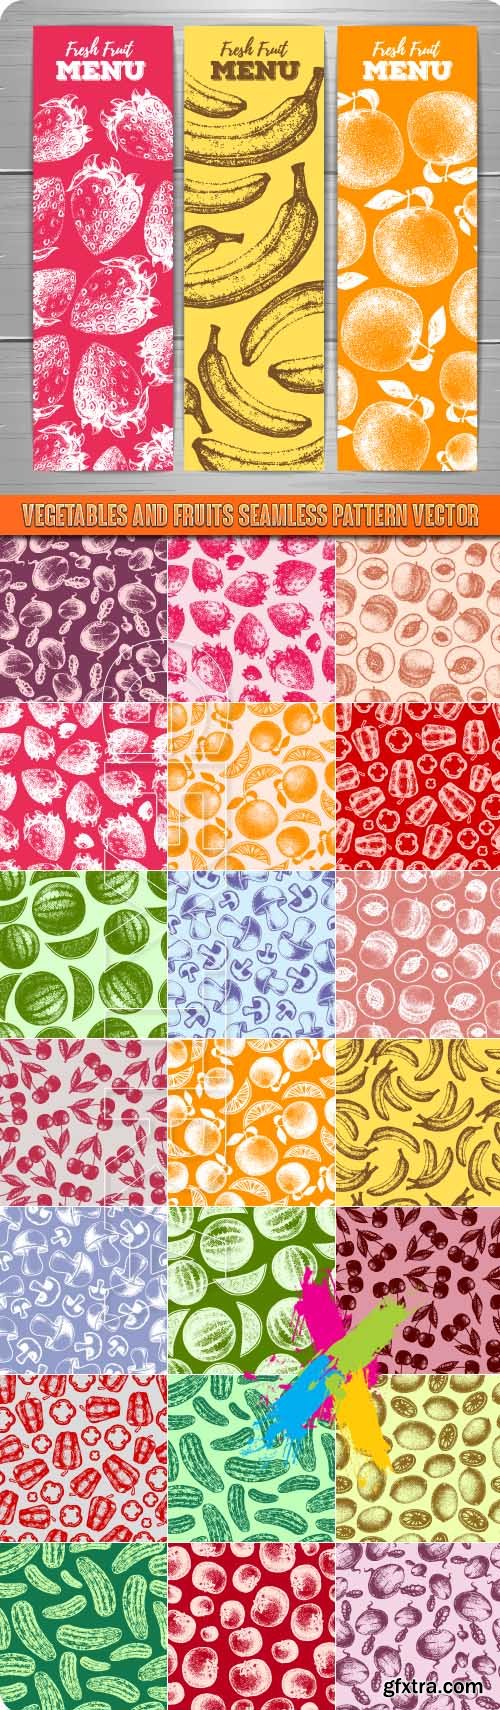 Vegetables and fruits seamless pattern vector